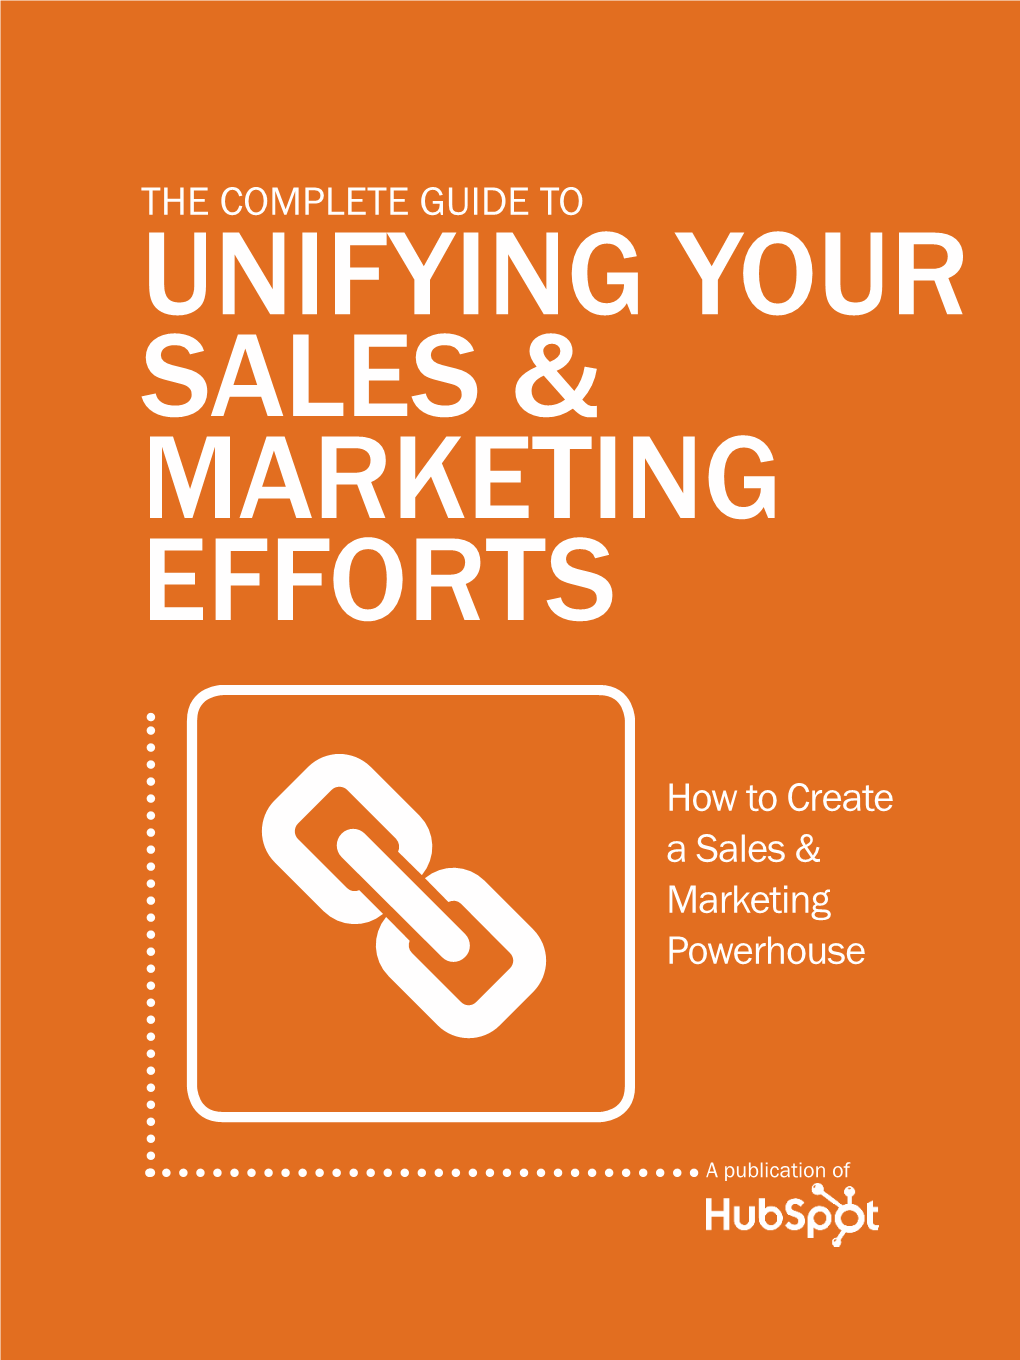 How to Create a Sales & Marketing Powerhouse The